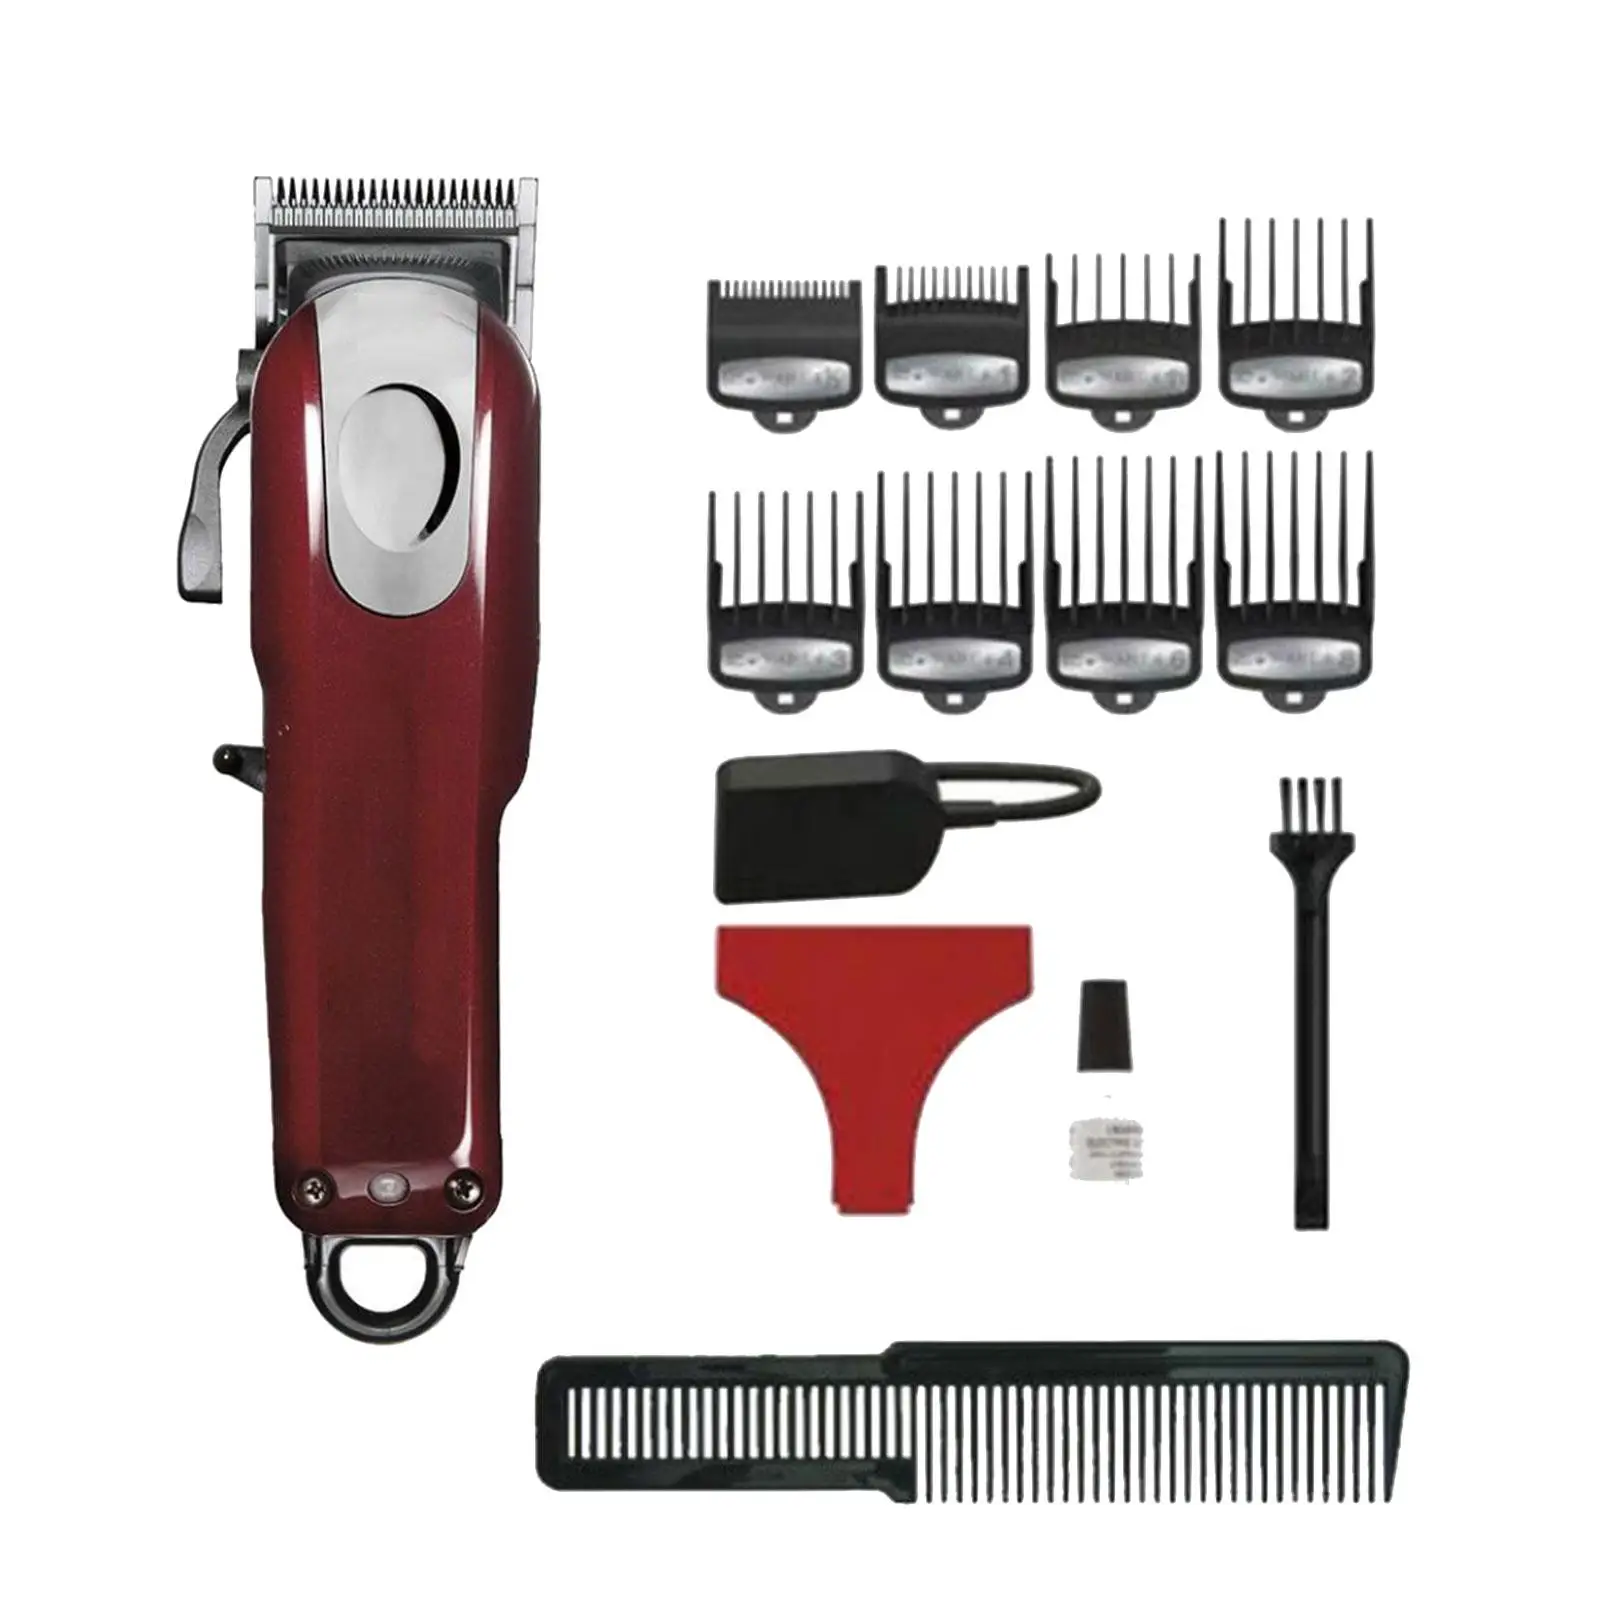 Electric Hair Clipper 8148 EU Power Adapter with Oil, Cutting Guides, Styling Comb for Stylists Professional Cordless Use